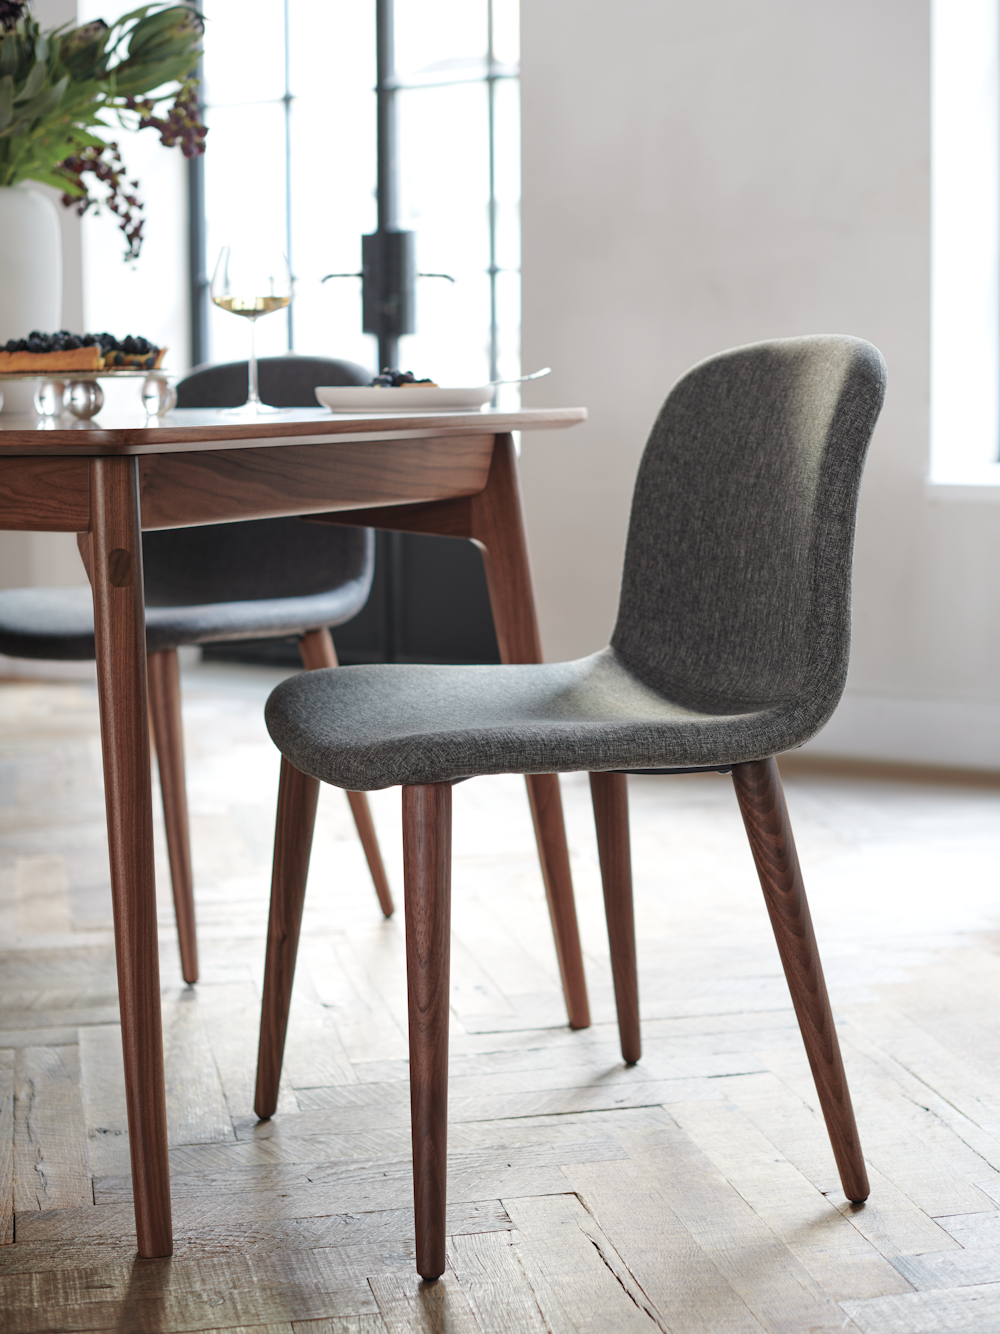 Bacco Chair in Duet Night at dining table